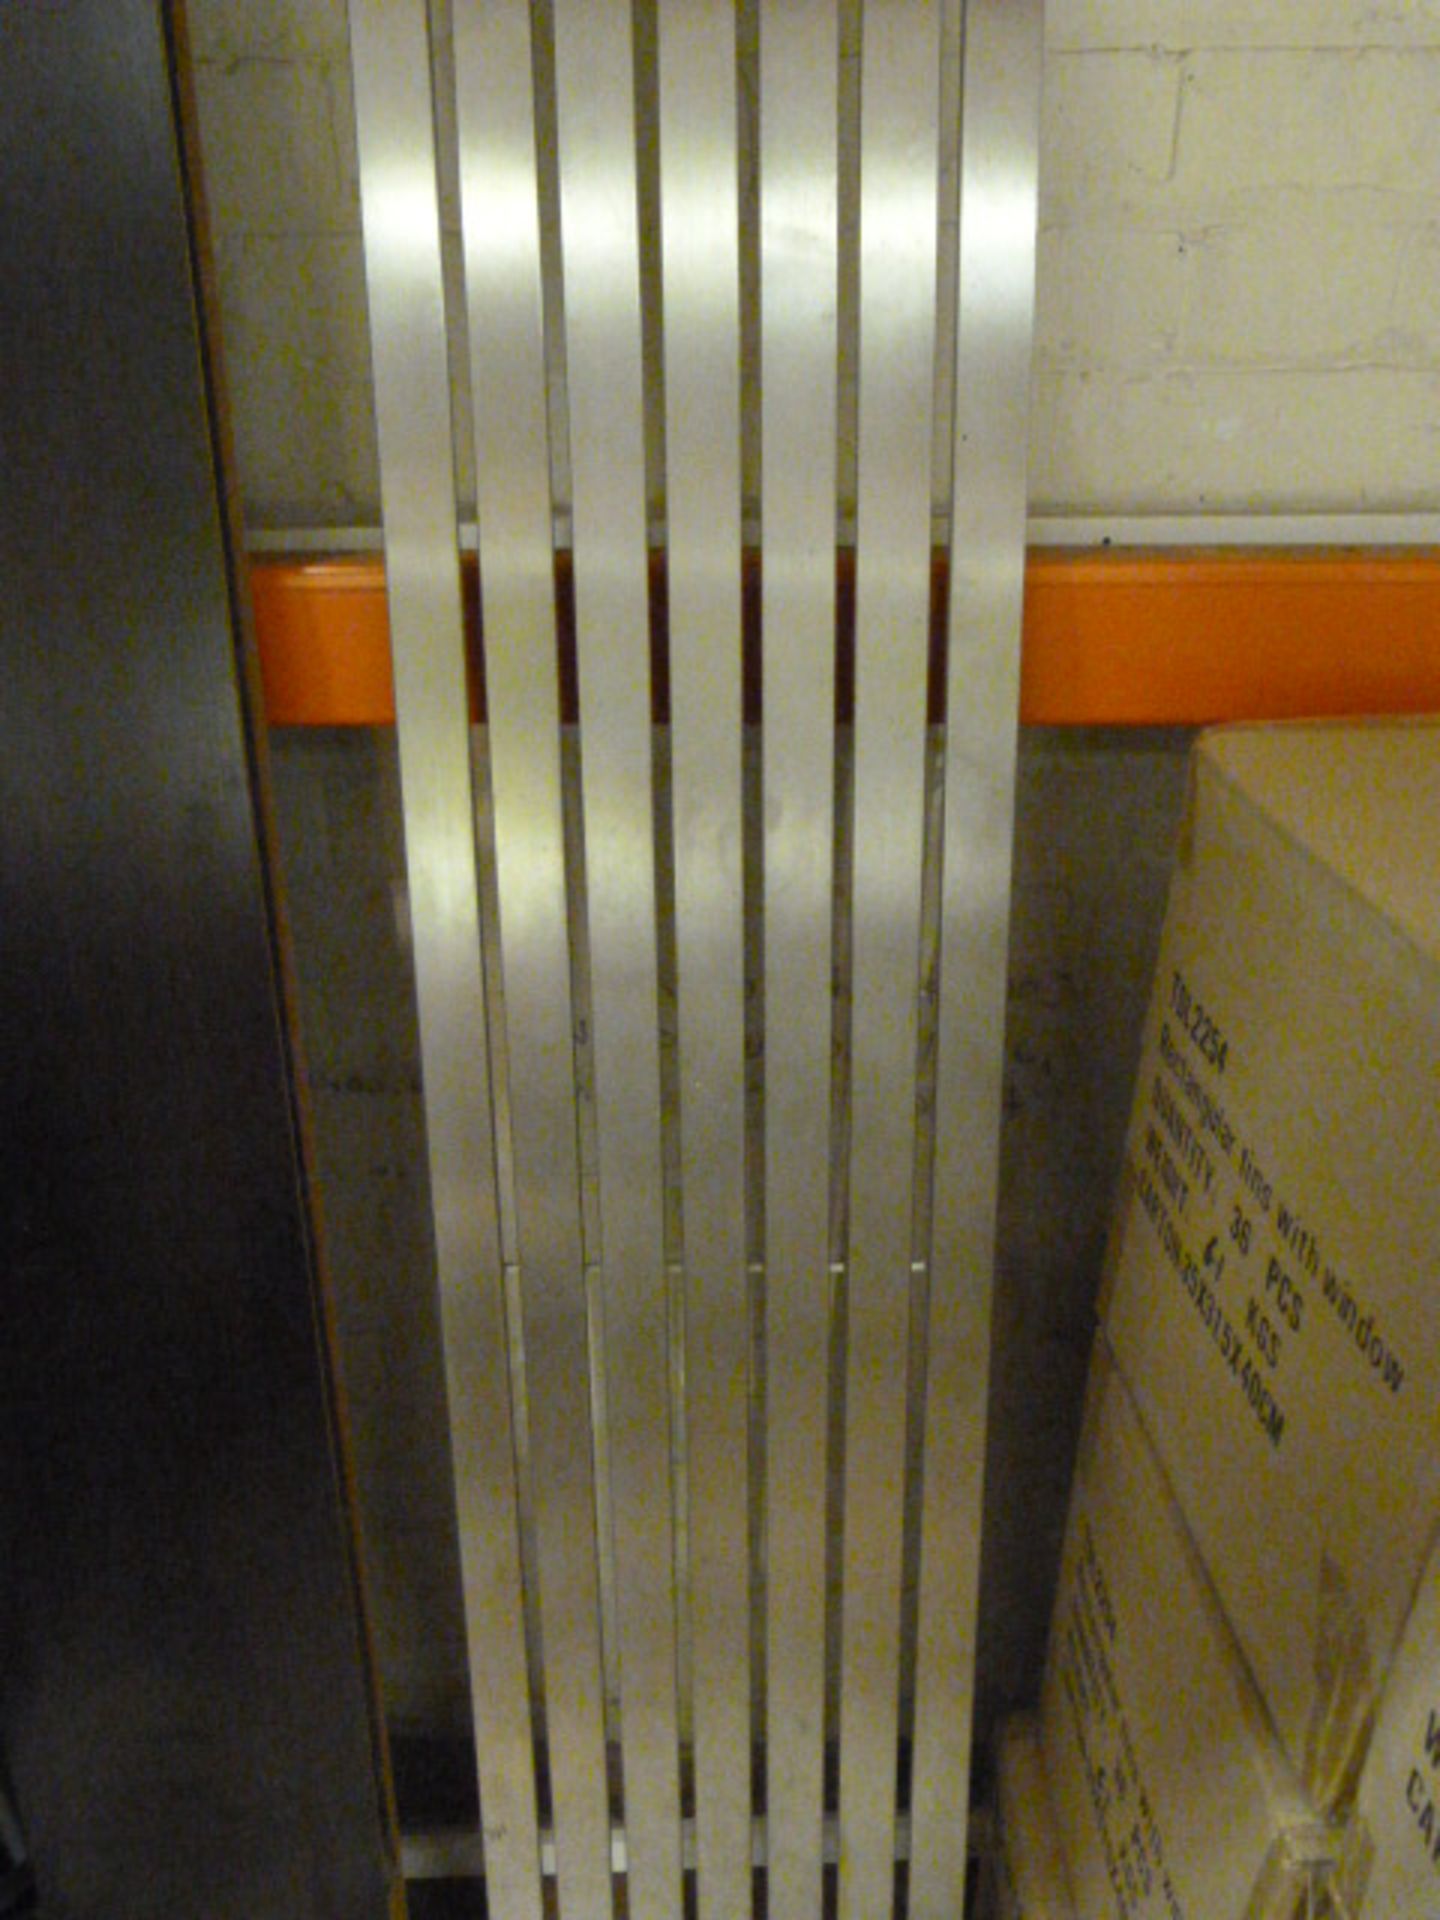 Stainless Steel 6ft Contemporary Radiator